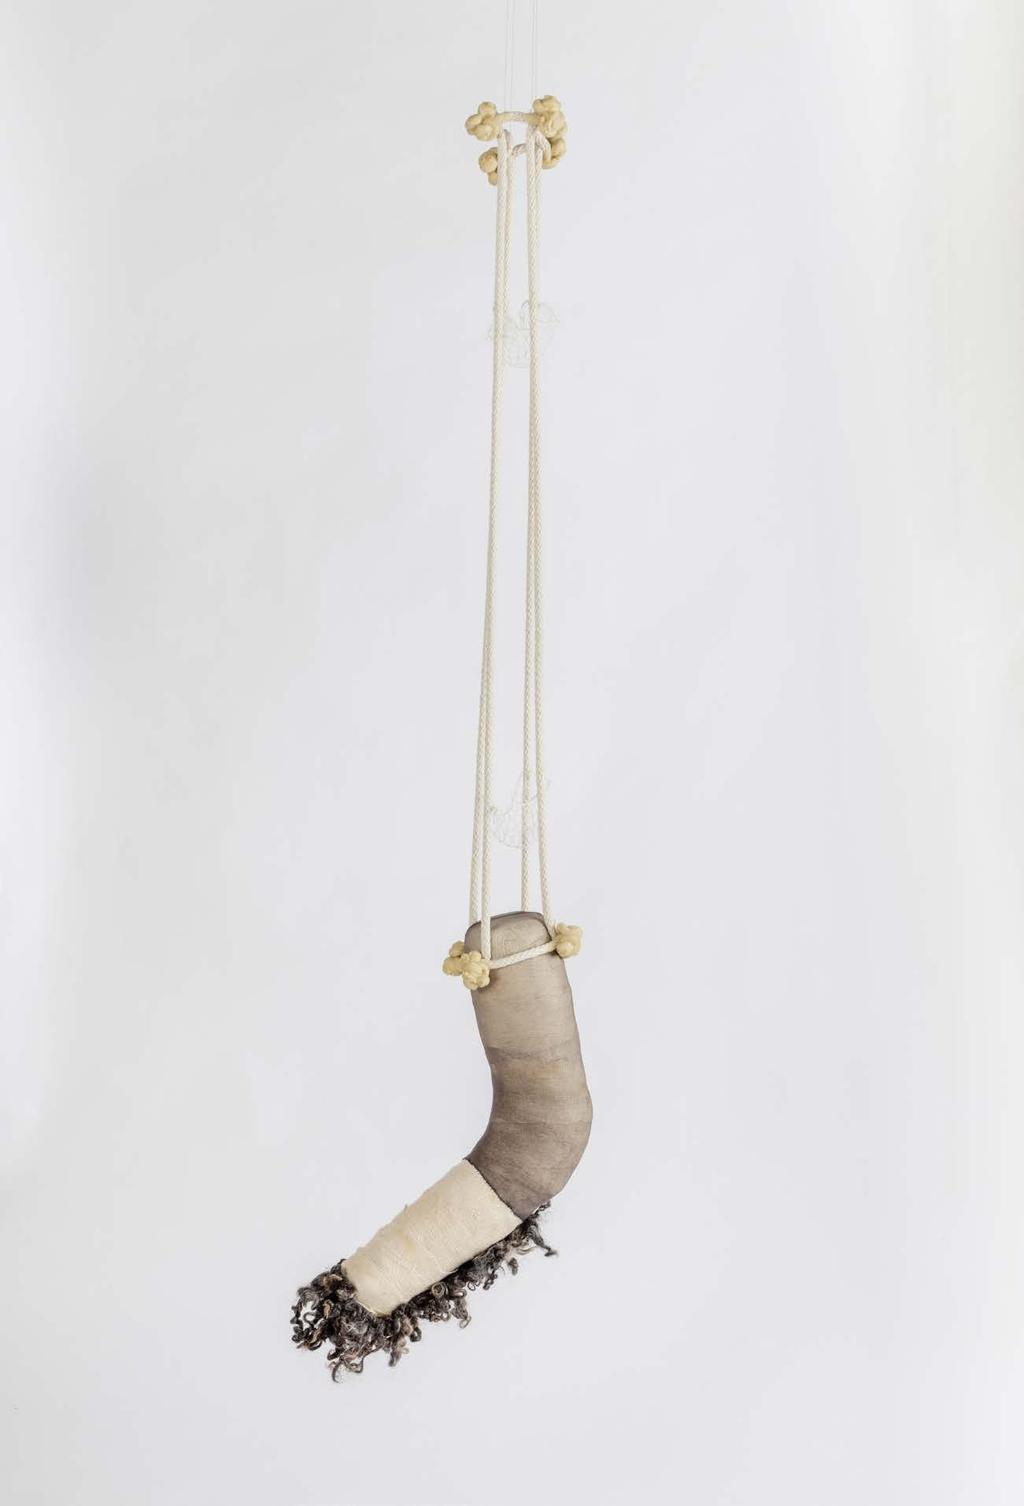 TANYA AGUIÑIGA Structures of Oppression Cotton rope, cotton thread, foam, gauze, selfdrying clay,